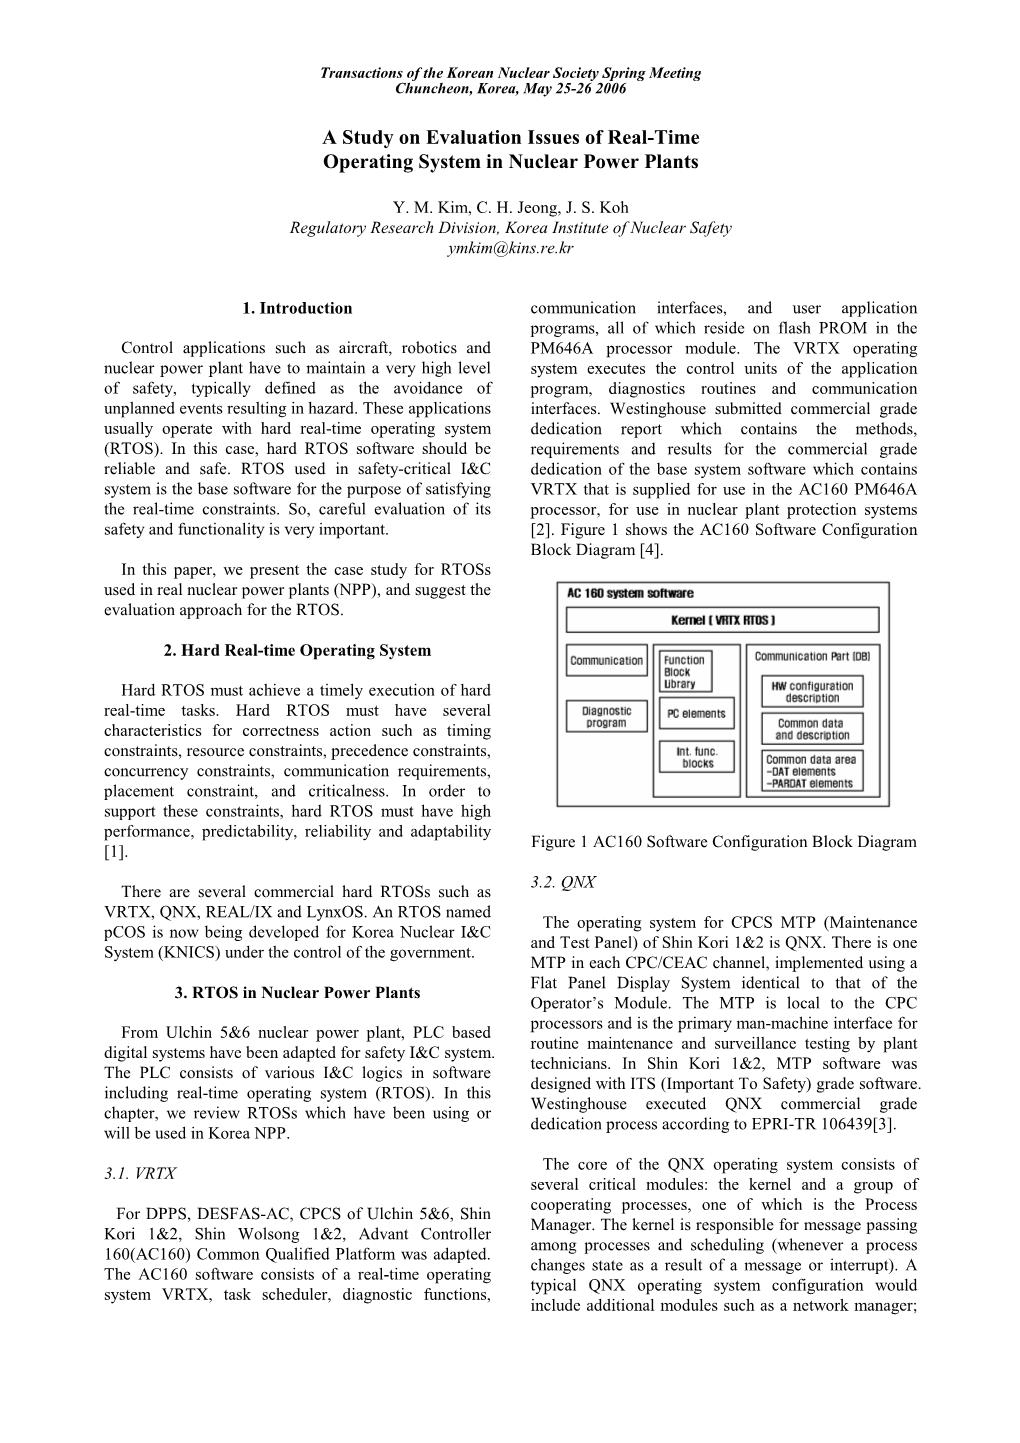 A Study on Evaluation Issues of Real-Time Operating System in Nuclear Power Plants